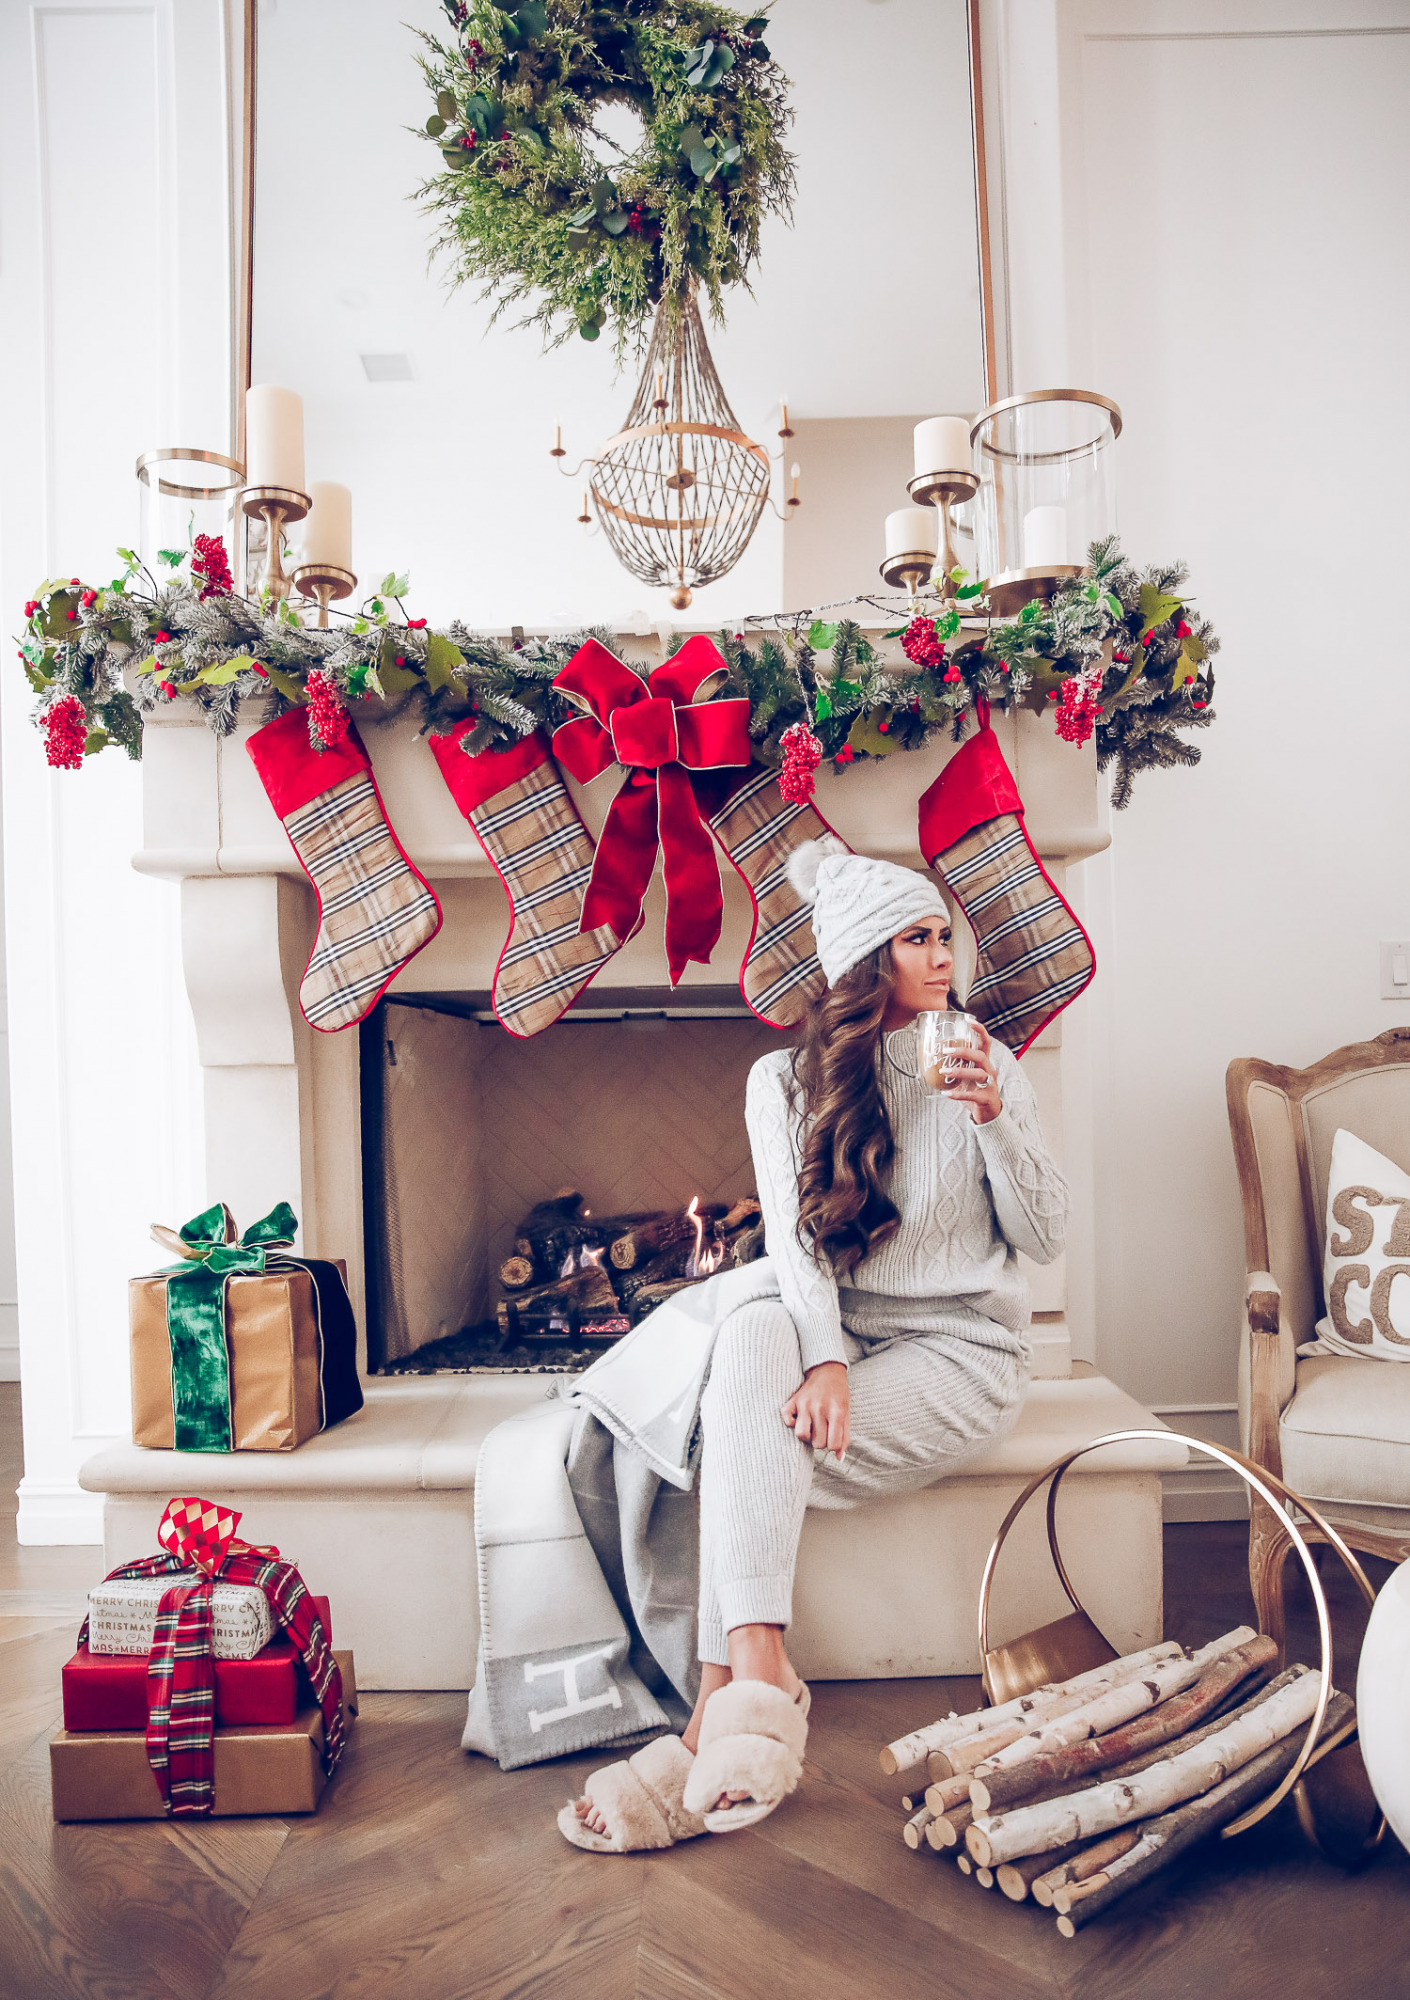 Express loungewear holiday 2020, express sweatsuit december 2020, emily gemma, holiday fireplace garland christmas | Cute Loungewear by popular US fashion blog, The Sweetest Thing: image of Emily Gemma sitting in front of a fireplace decorated with a garland, plaid stockings, and wrapped presents and wearing an Express sweater, Express pants, Express fuzzy slippers, and an Express pom beanie. 